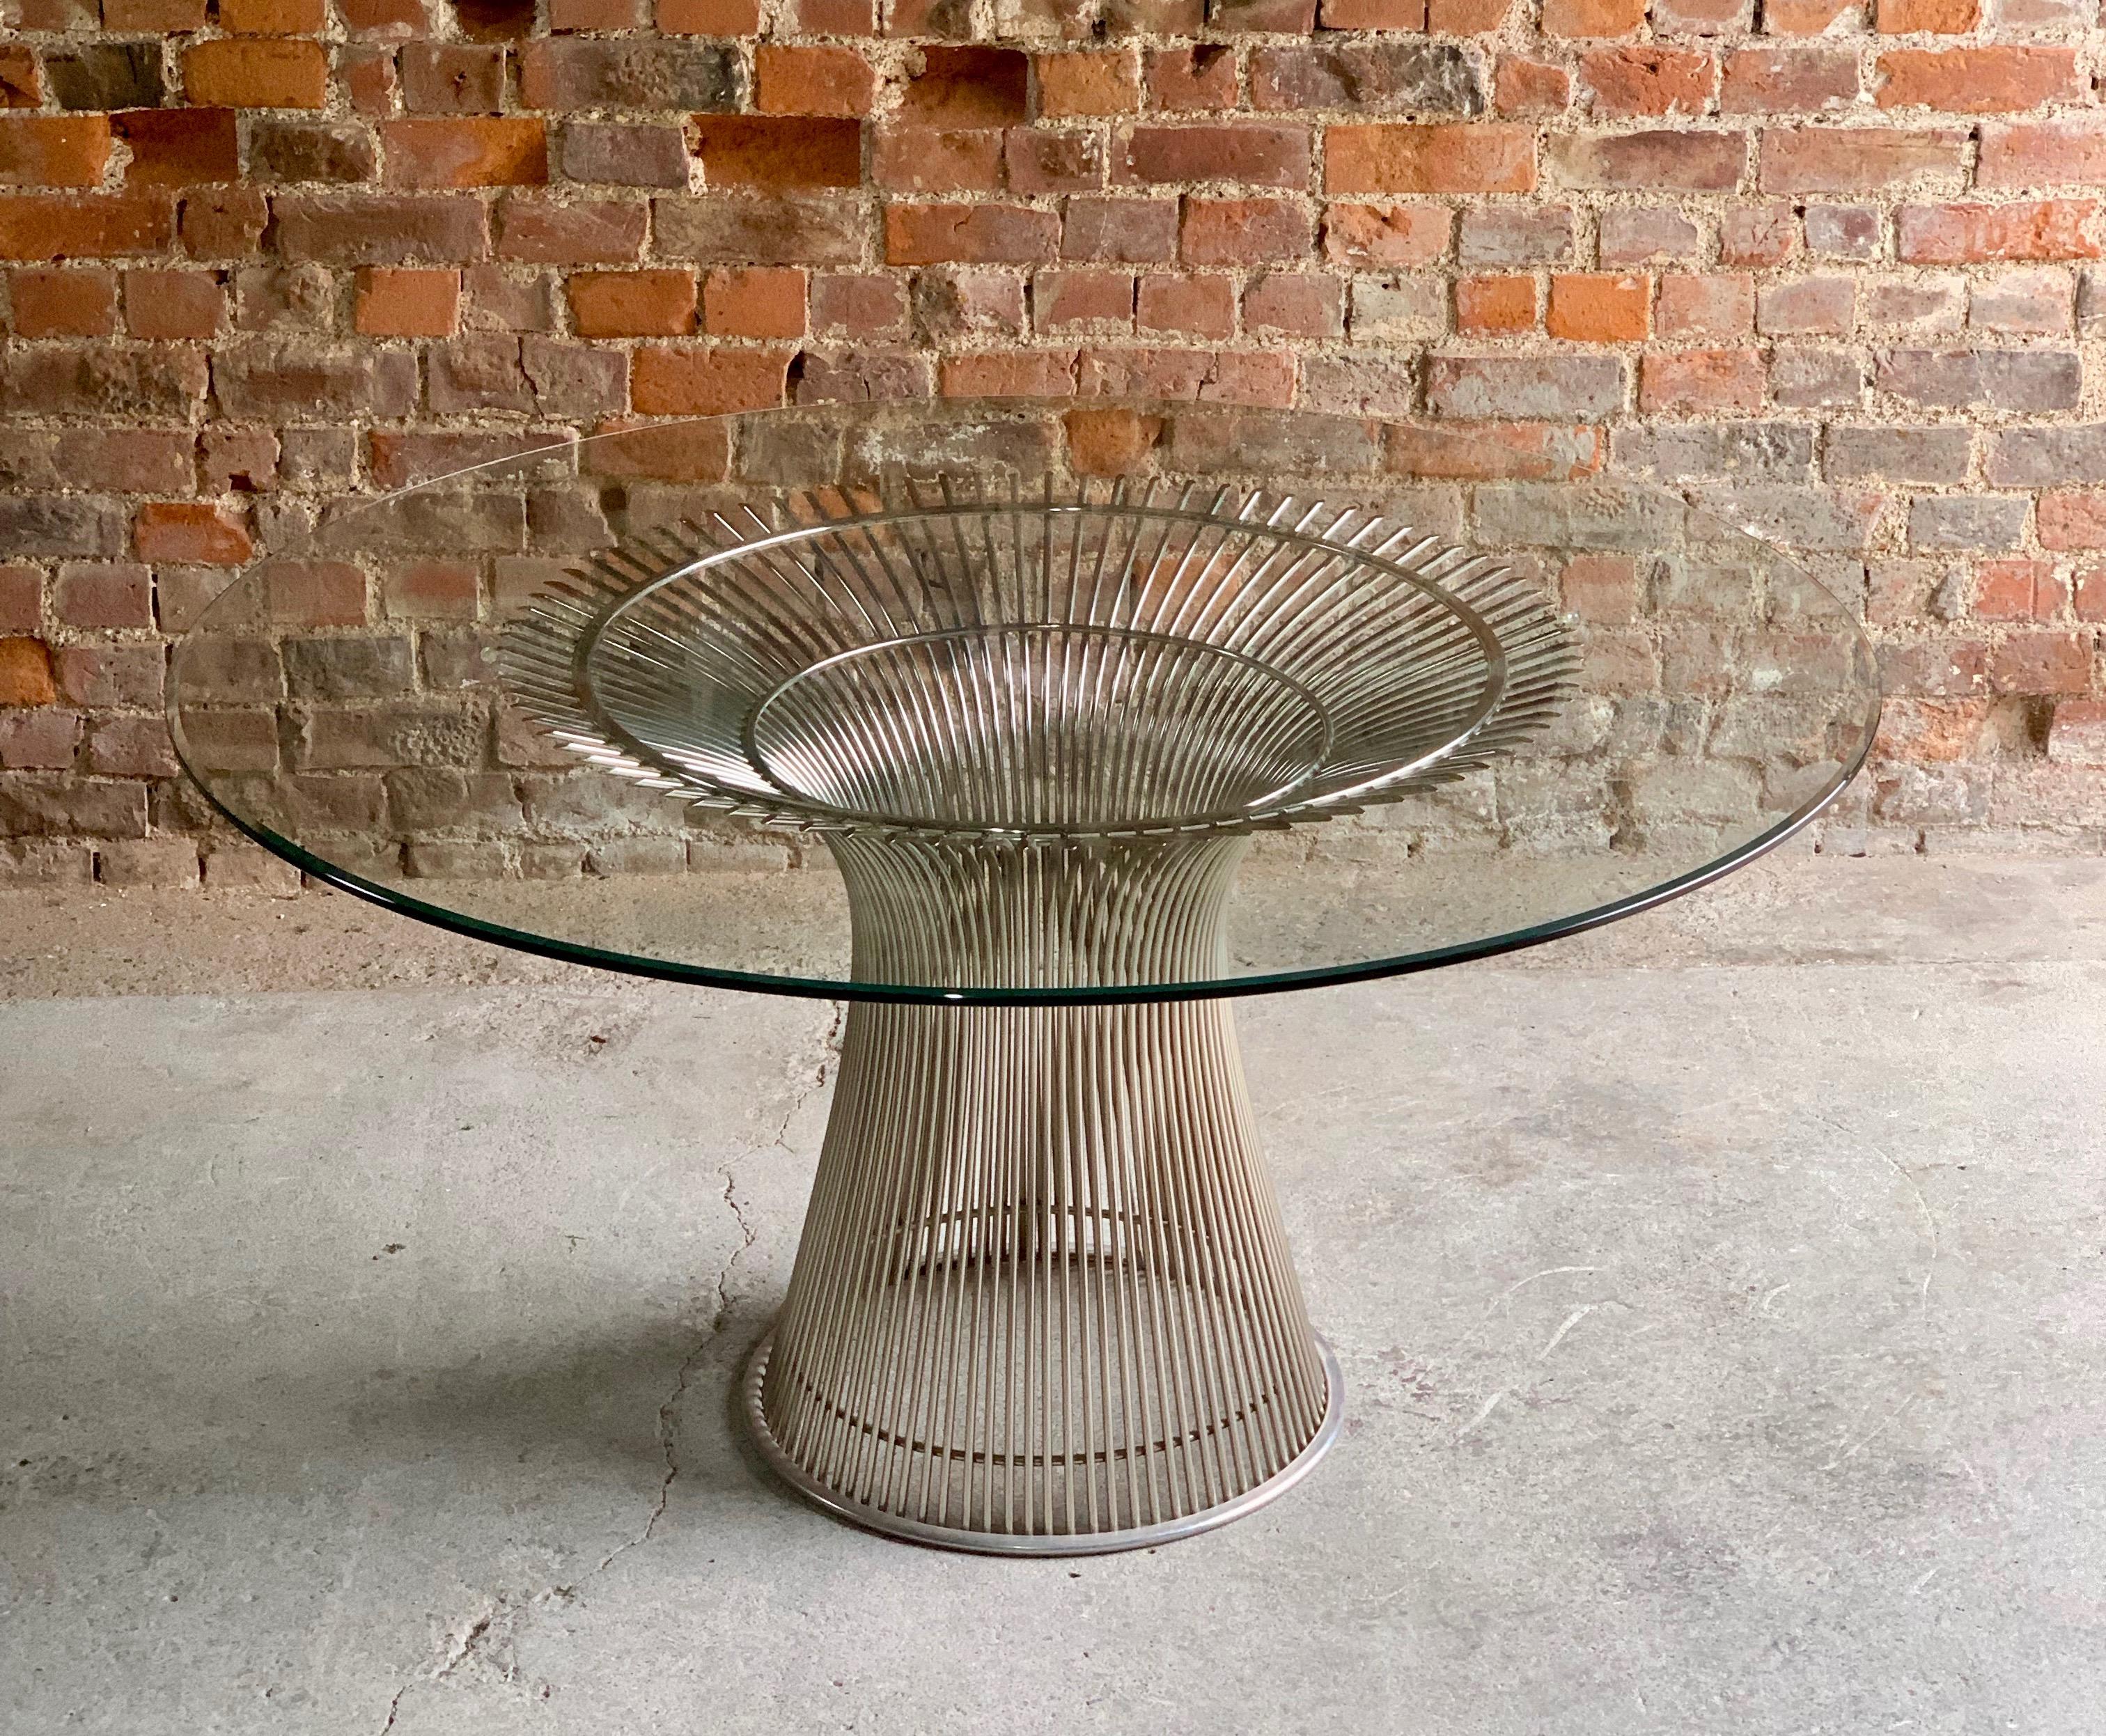 Late 20th Century Platner Dining Table by Warren Platner for Knoll Mid-Century Modern Design